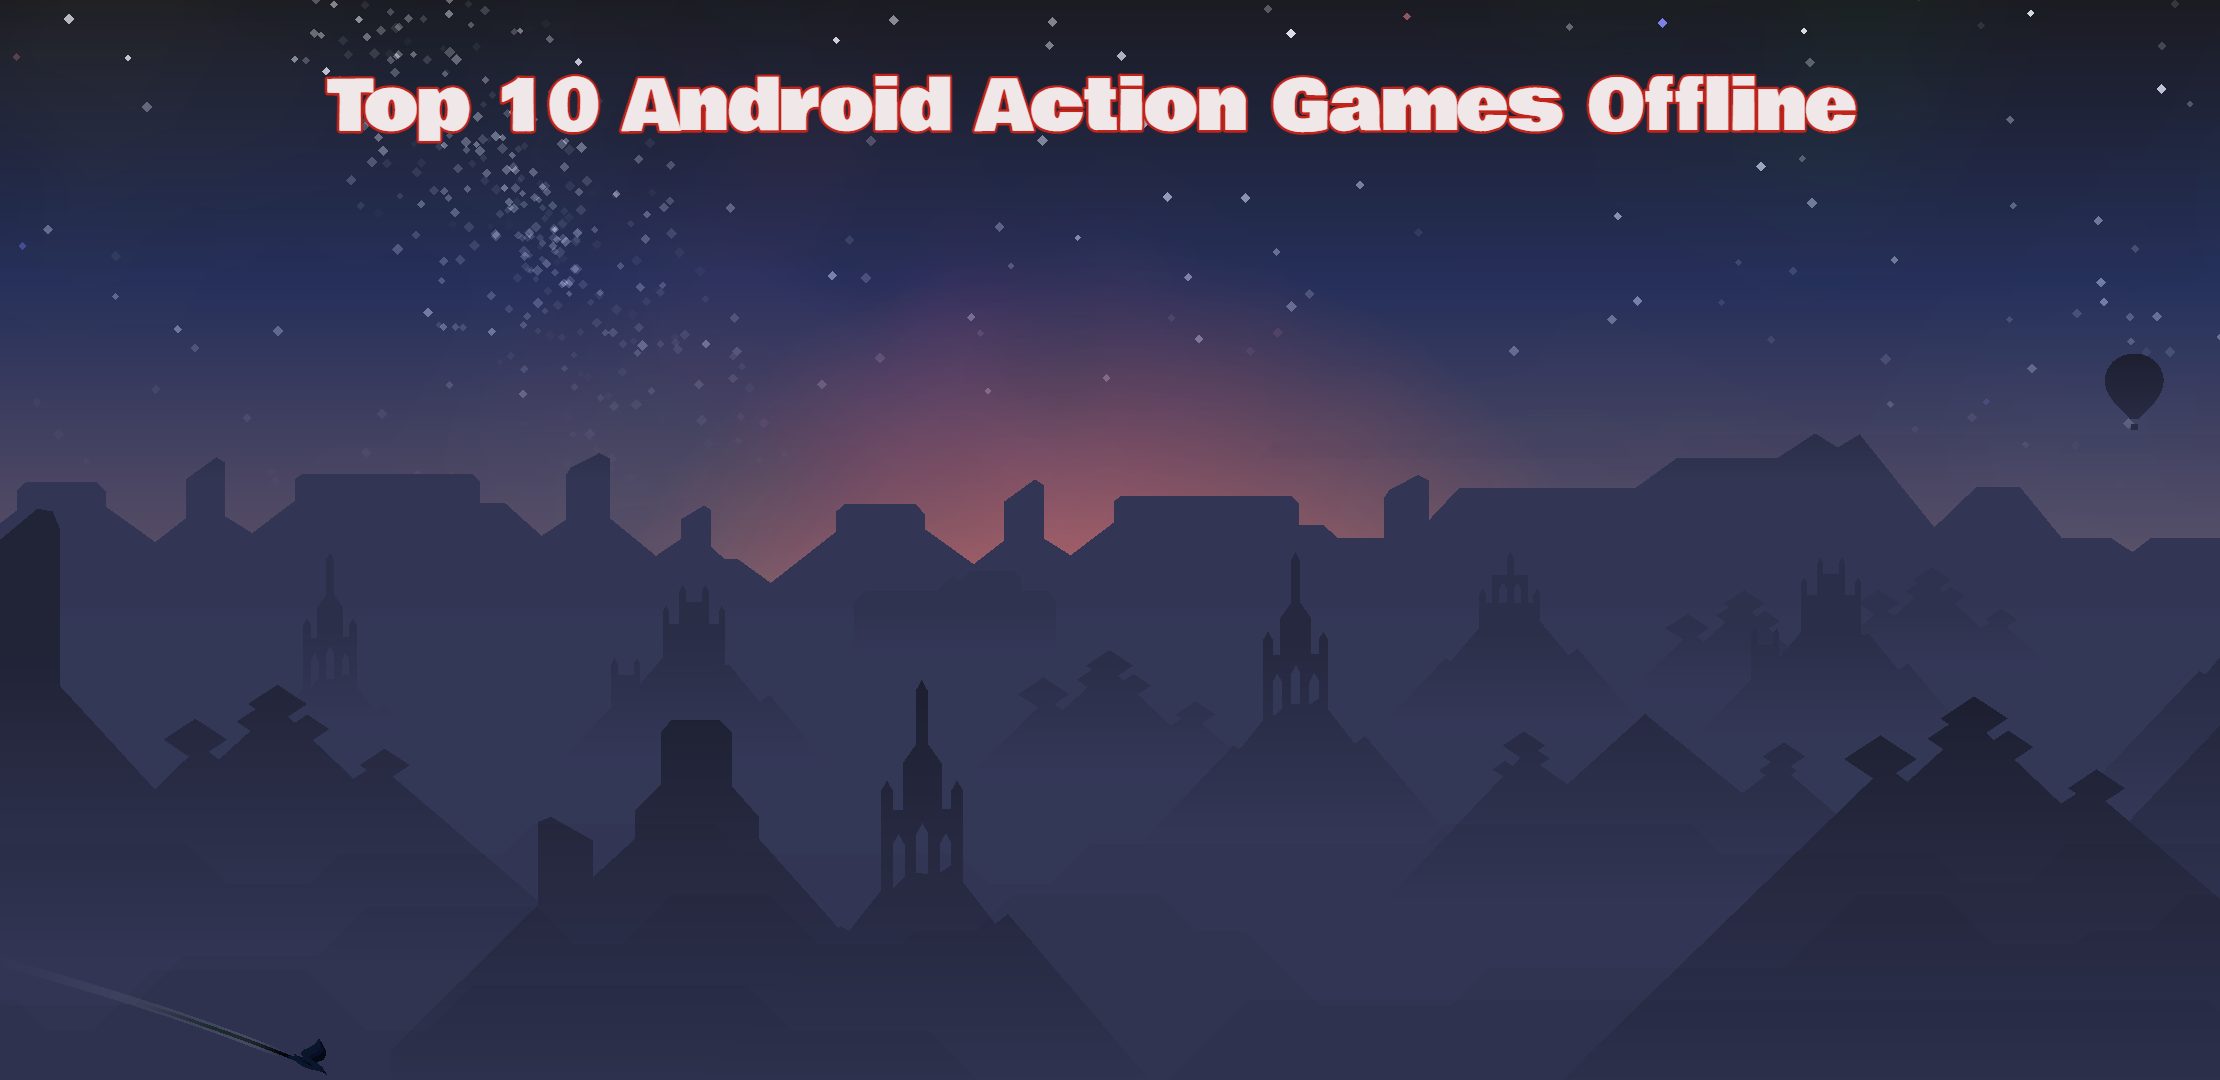 You are currently viewing Top 10 Android Action Games Offline